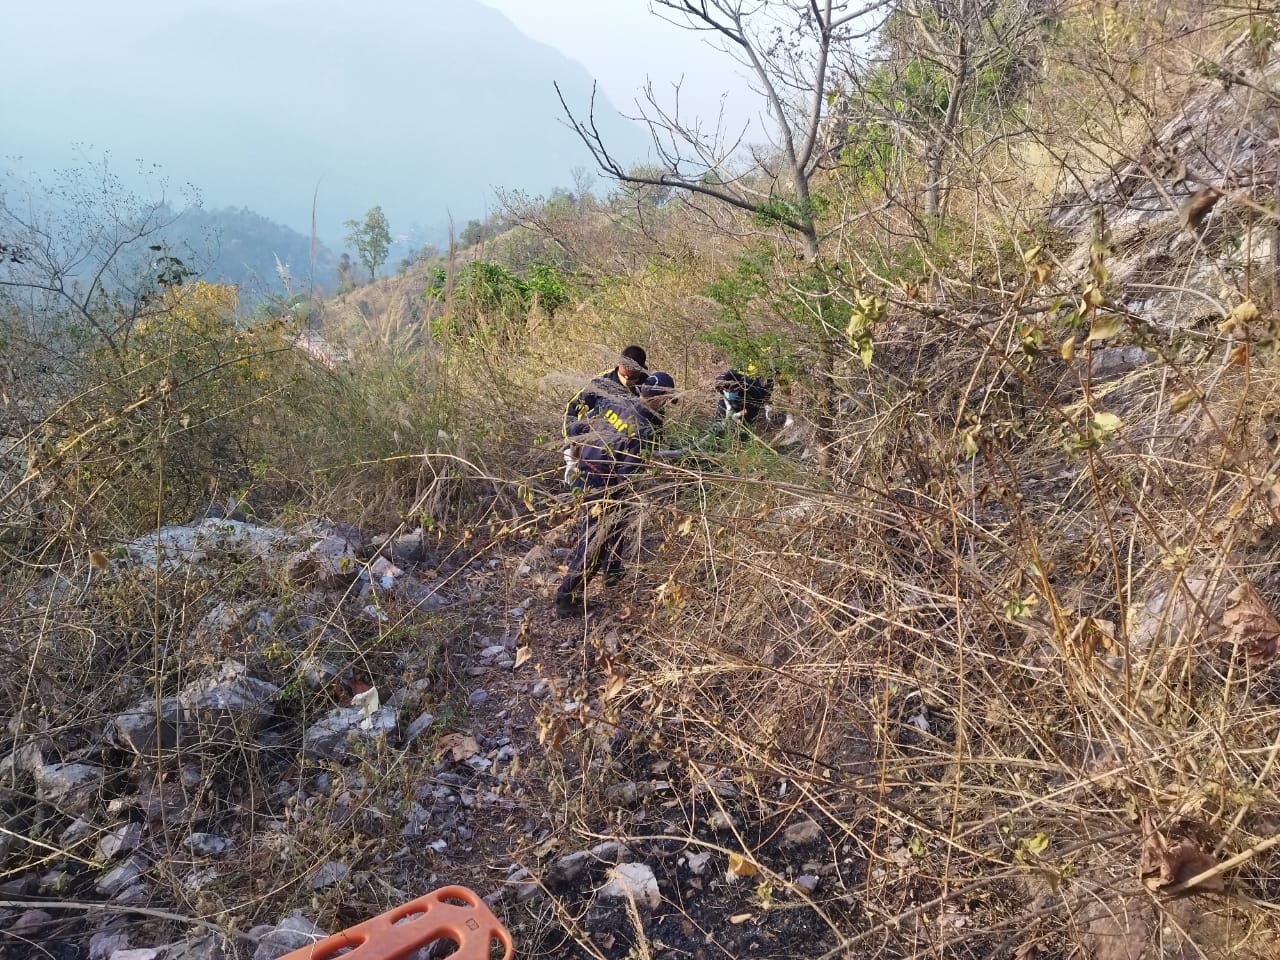 sdrf-recover-half-burn-body-from-sucide-point-nainital